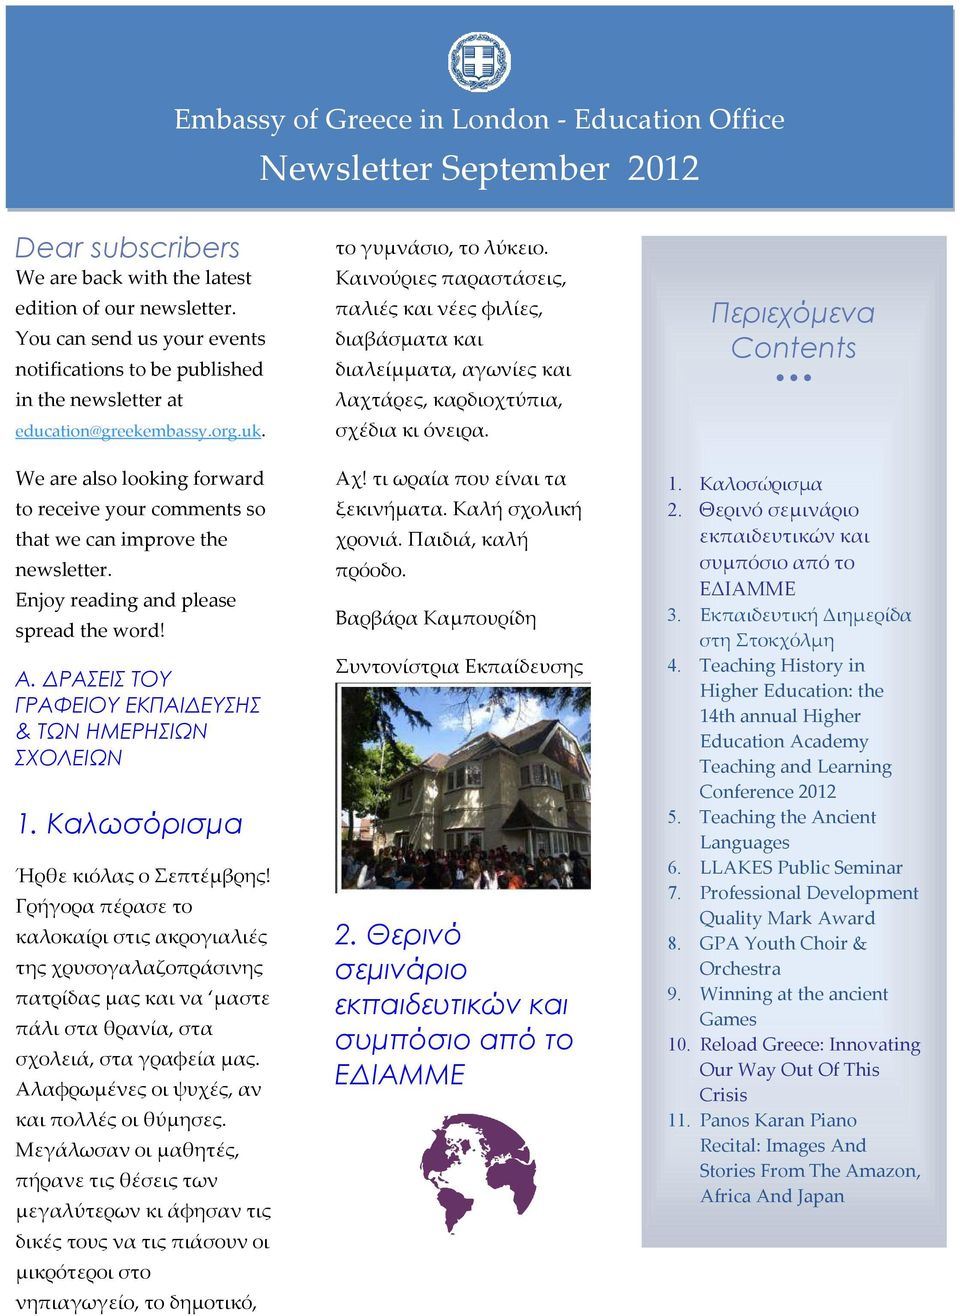 We are also looking forward to receive your comments so that we can improve the newsletter. Enjoy reading and please spread the word! Α. ΡΑΣΕΙΣ ΤΟΥ ΓΡΑΦΕΙΟΥ ΕΚΠΑΙ ΕΥΣΗΣ & ΤΩΝ ΗΜΕΡΗΣΙΩΝ ΣΧΟΛΕΙΩΝ 1.